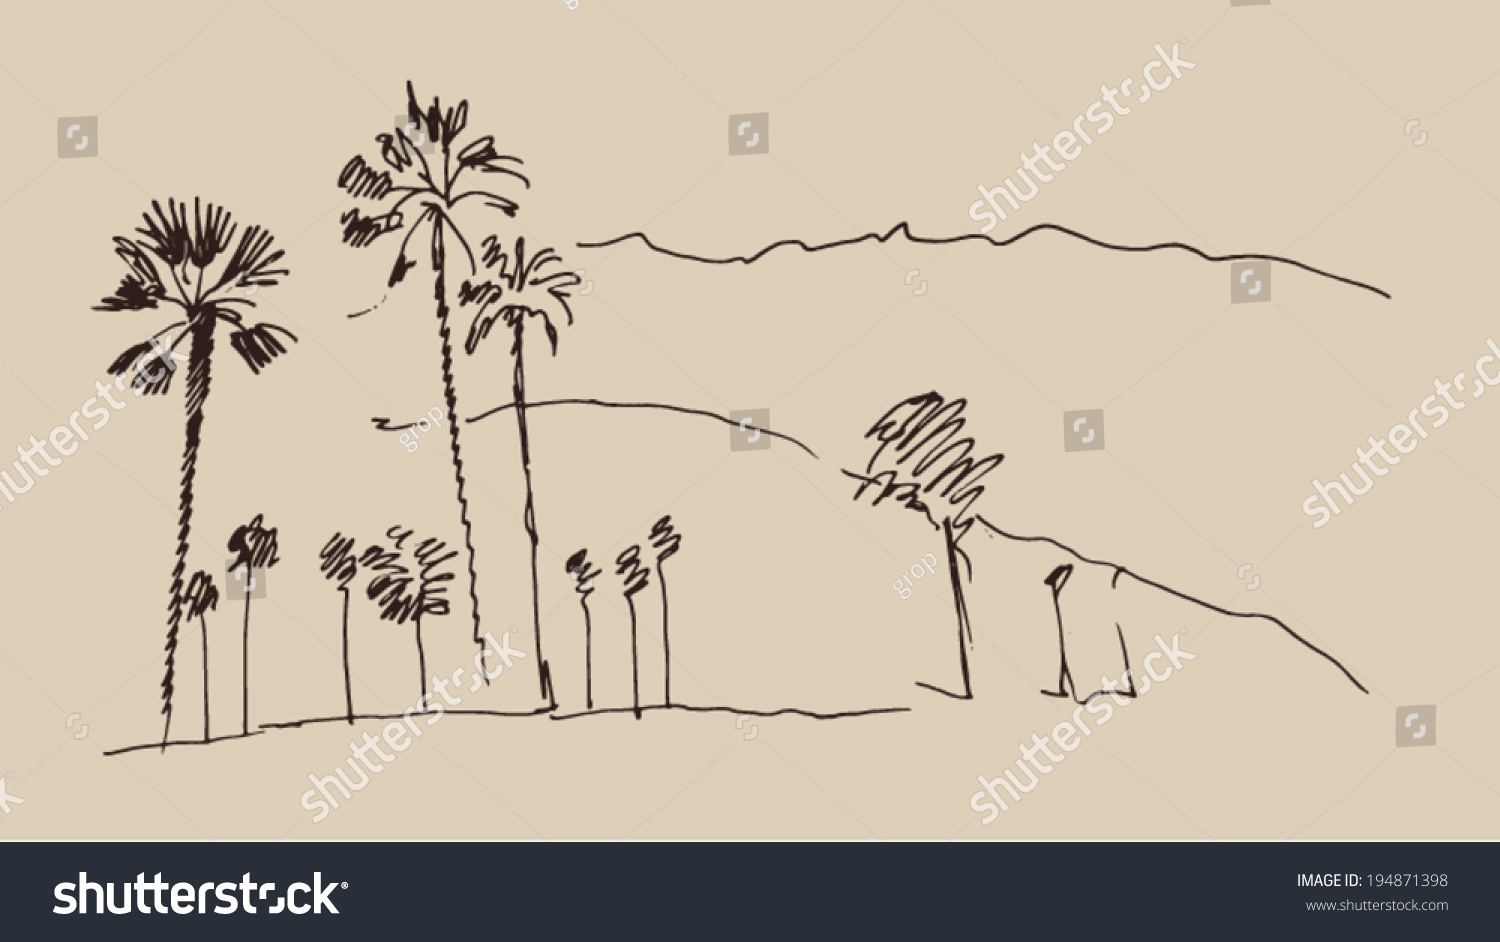 Hills And Trees Engraving Vector Illustration, Hand Drawn, Sketch